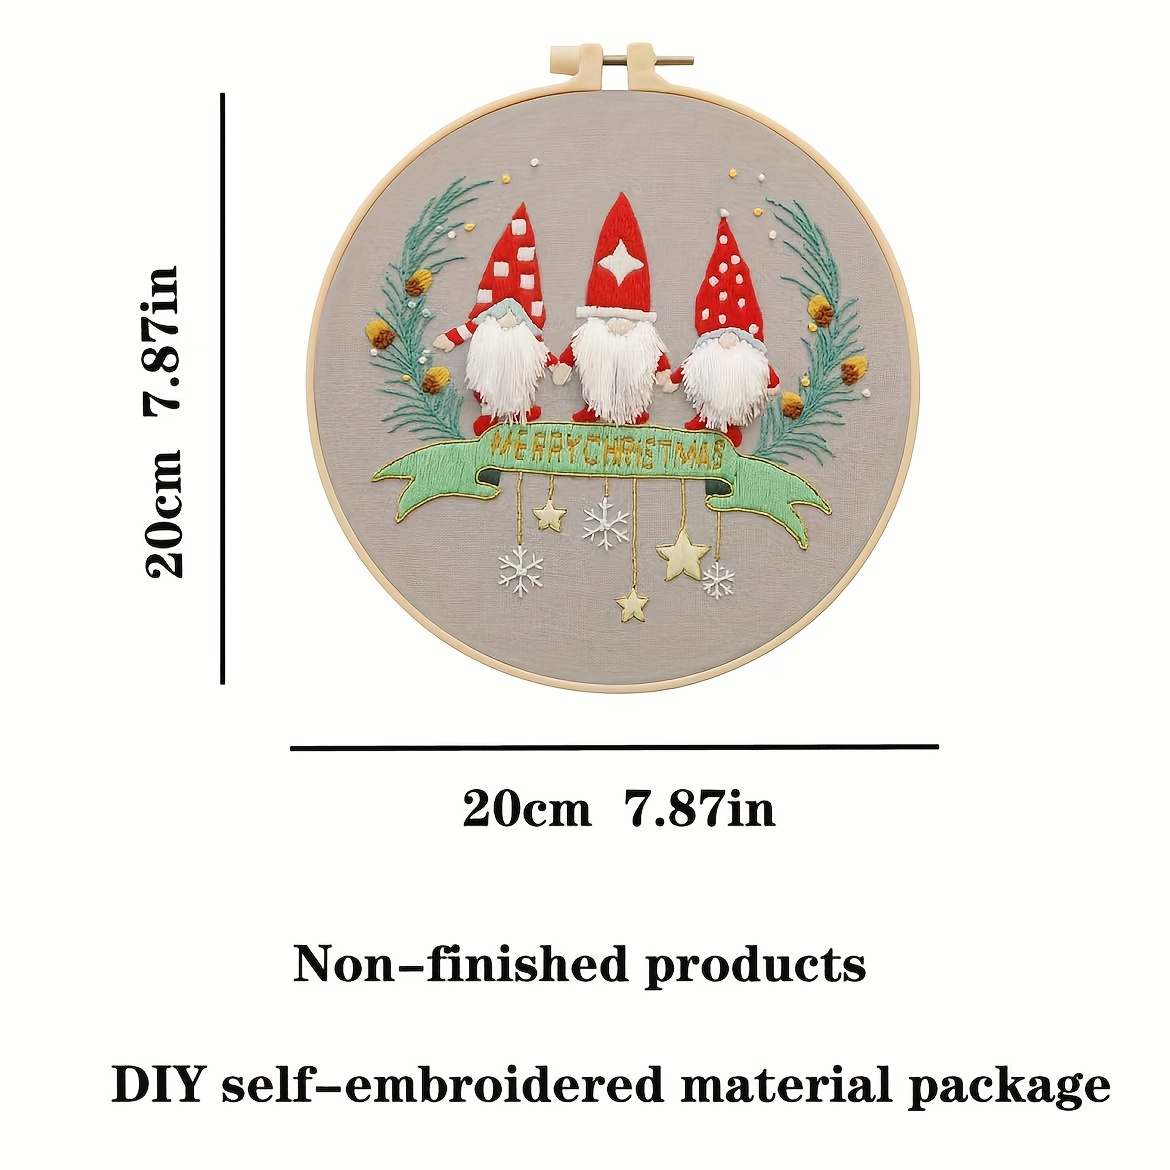 Embroidery Kit for Beginners, Kits for Adults Include 3 Embroidery Cloth with Pattern, Other